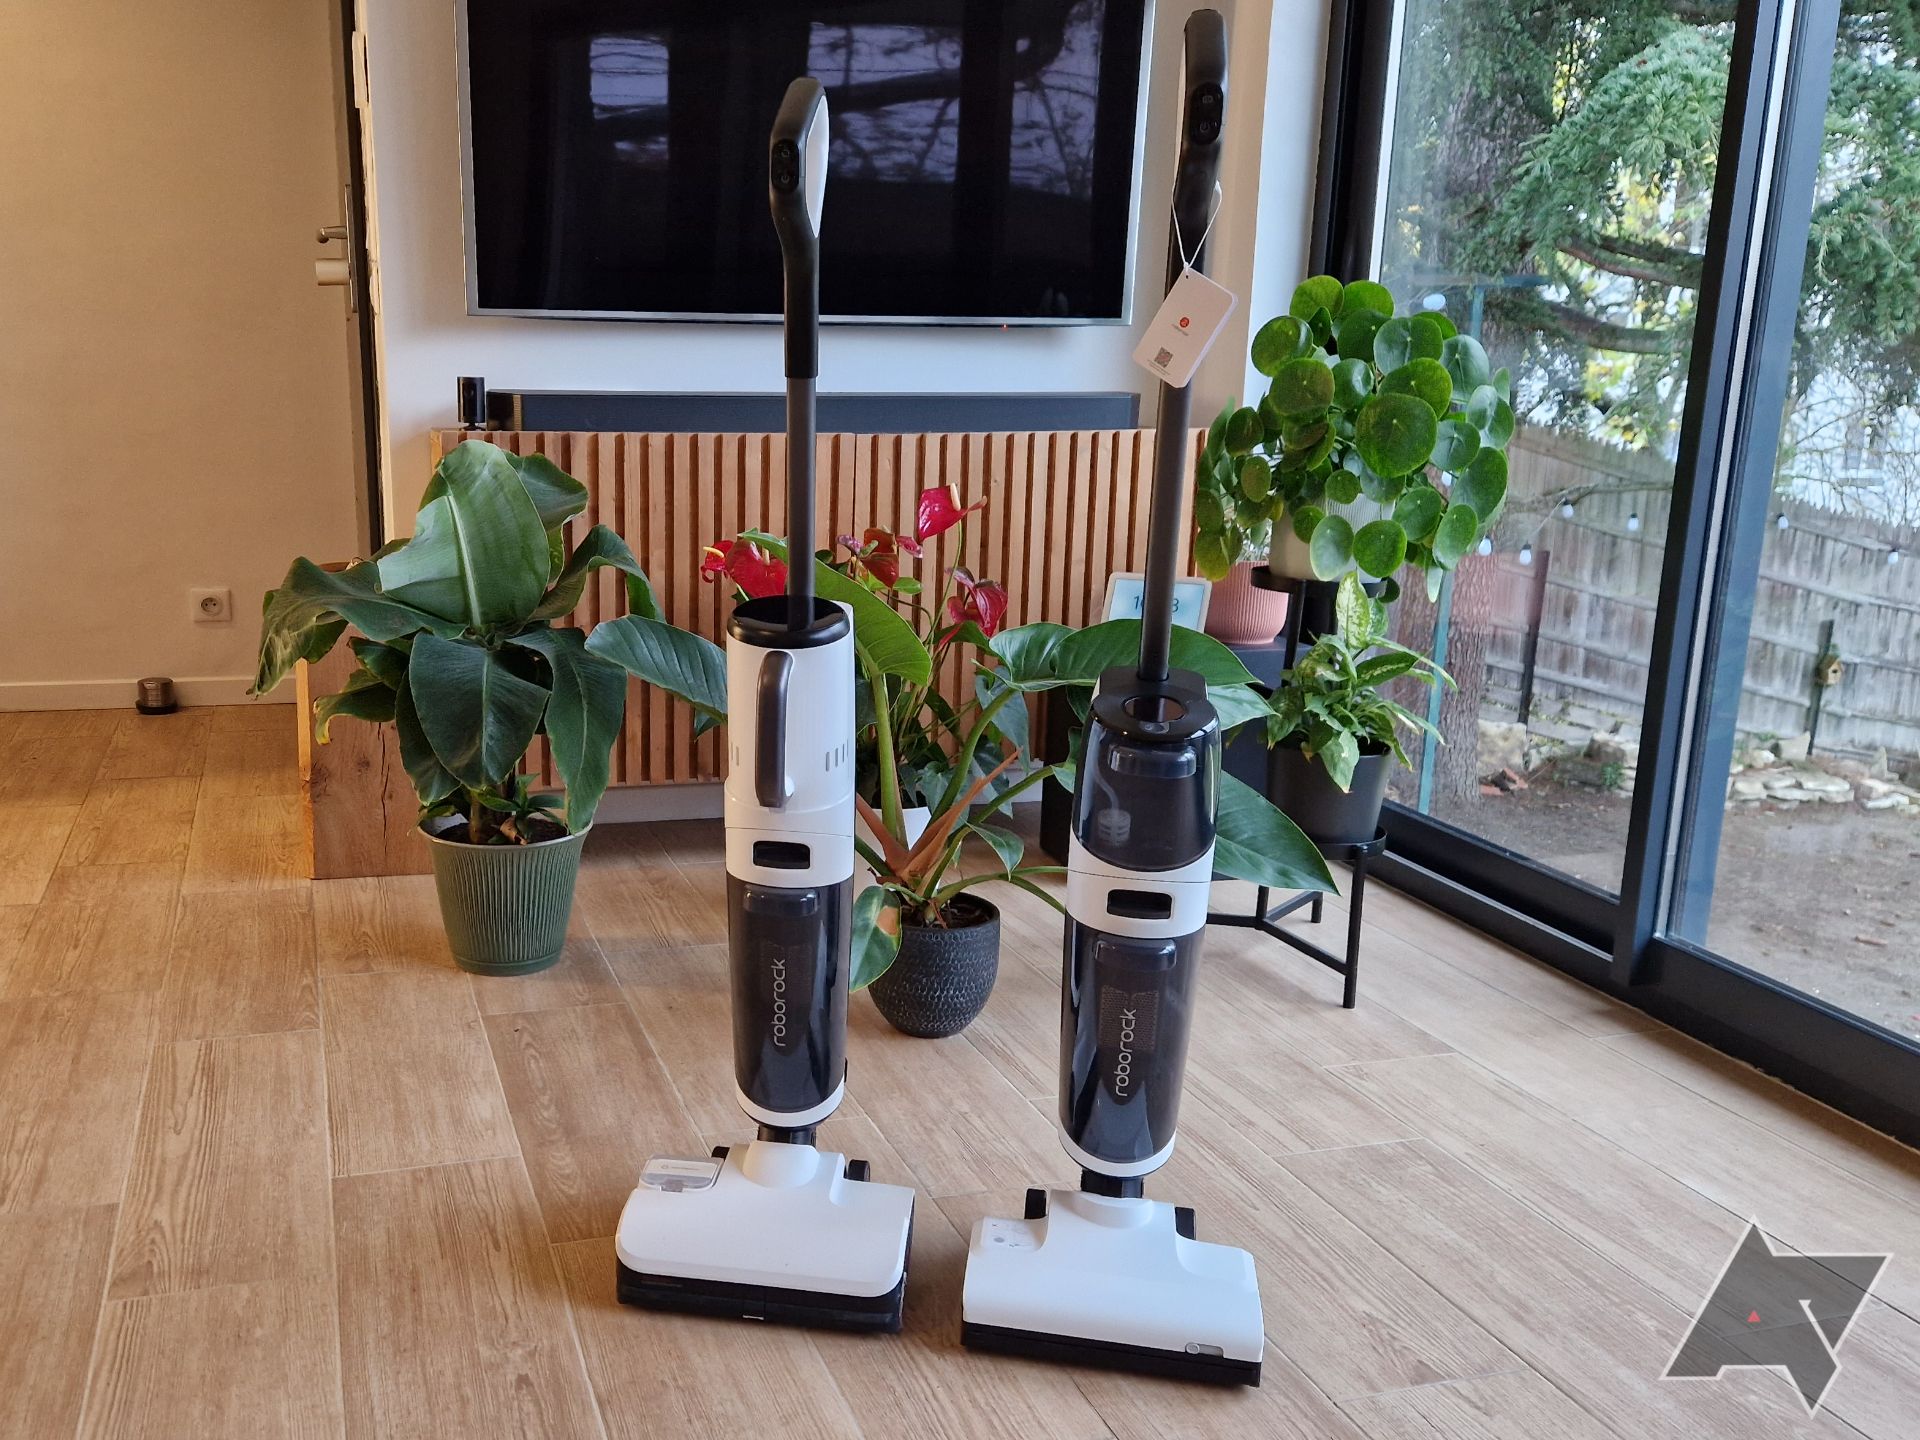 This app-connected wet-dry vacuum cleans where robovacs can't